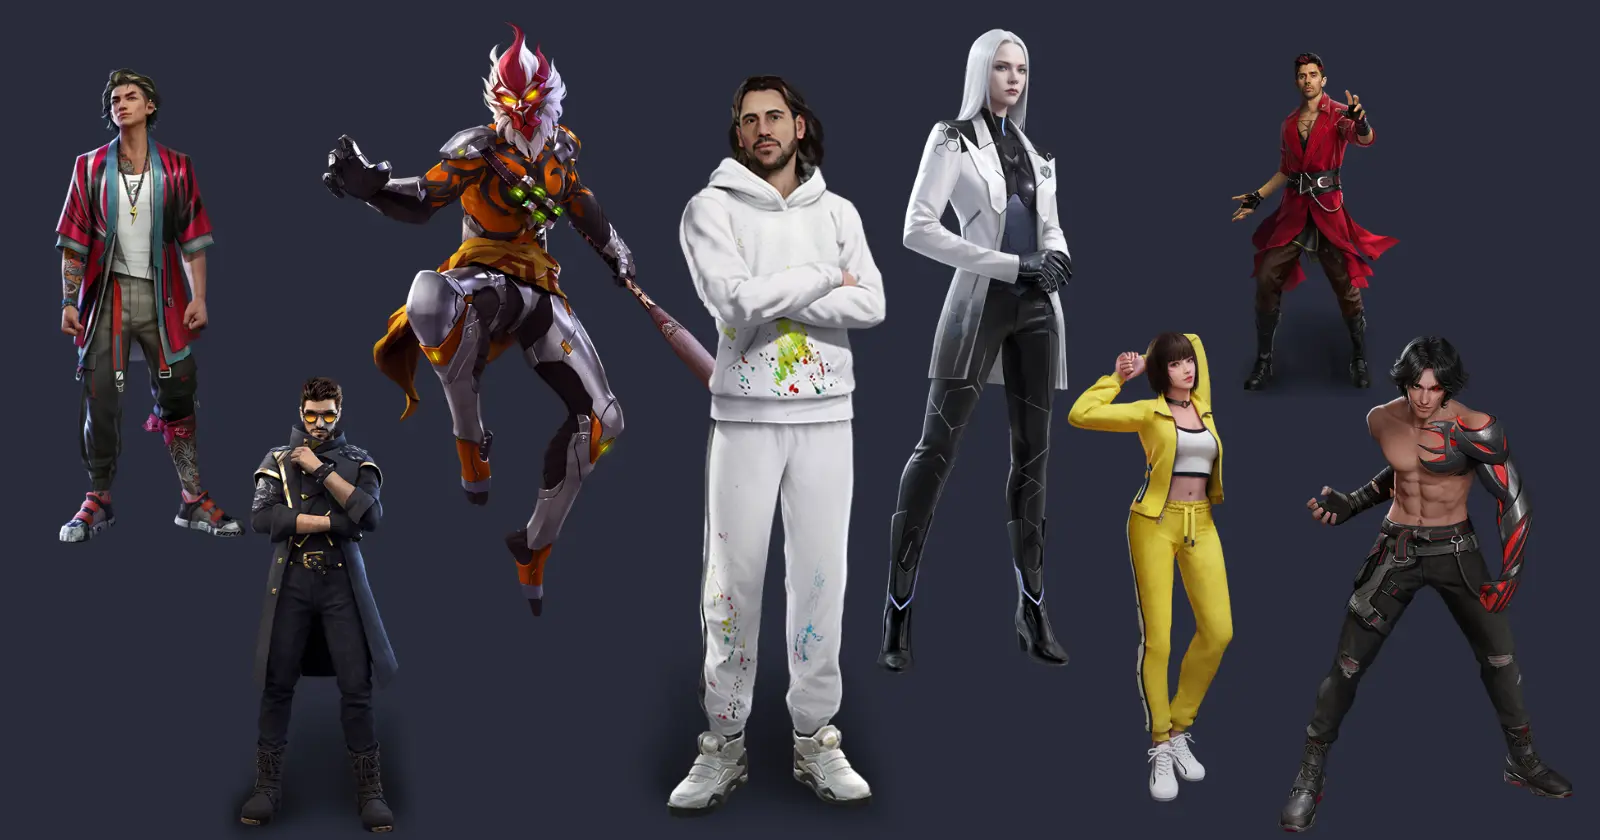 A group of seven best diverse free fire characters, each with unique outfits and poses, set against a dark background.